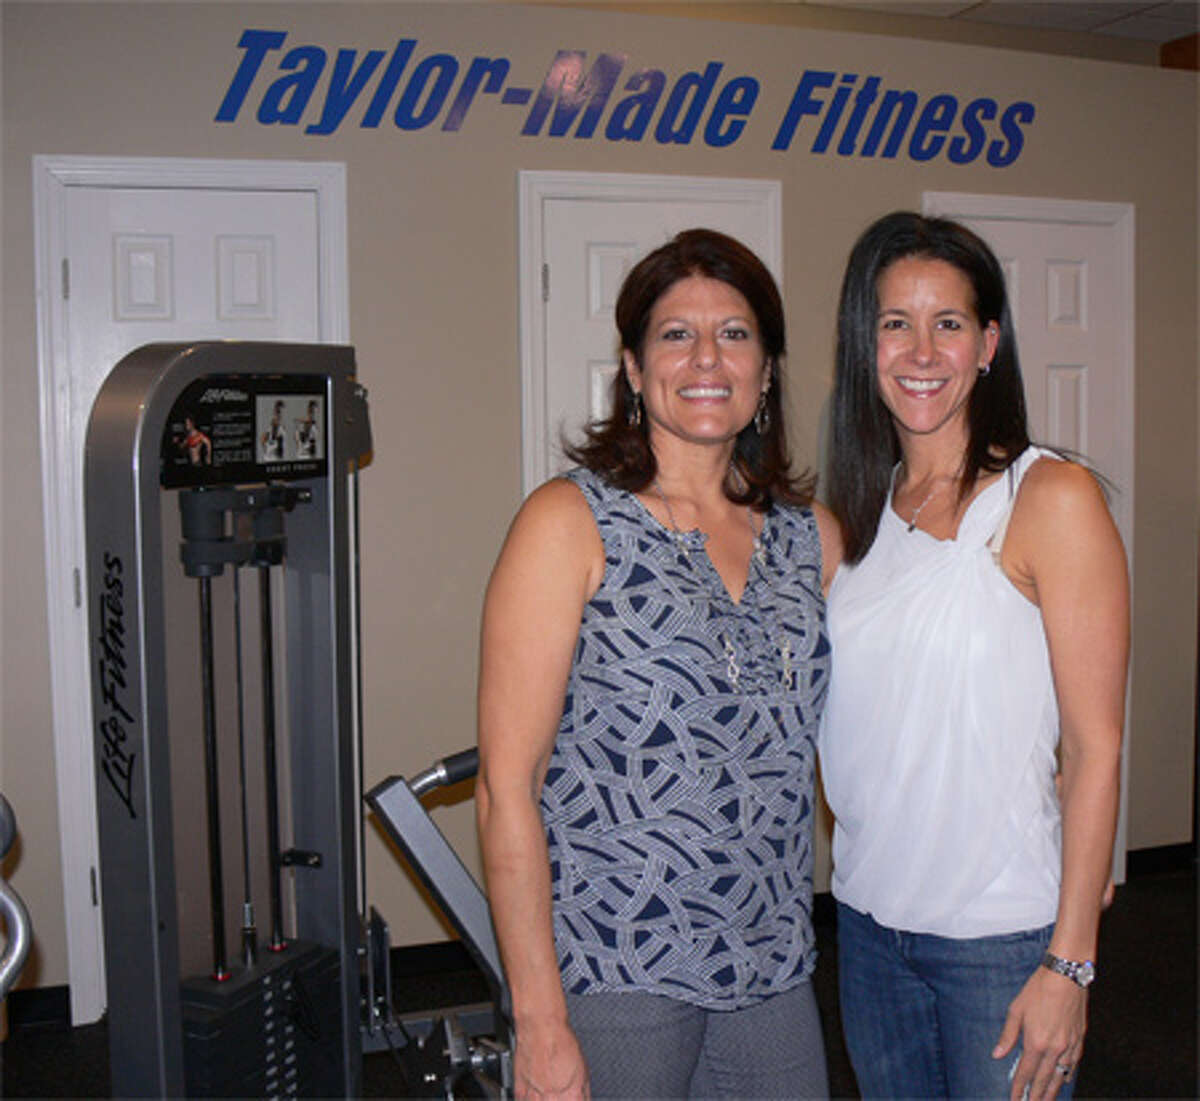 Taylor-Made Fitness co-owners Renee Daconto, left, and Patricia Taylor inside the new facility on Bridgeport Avenue.